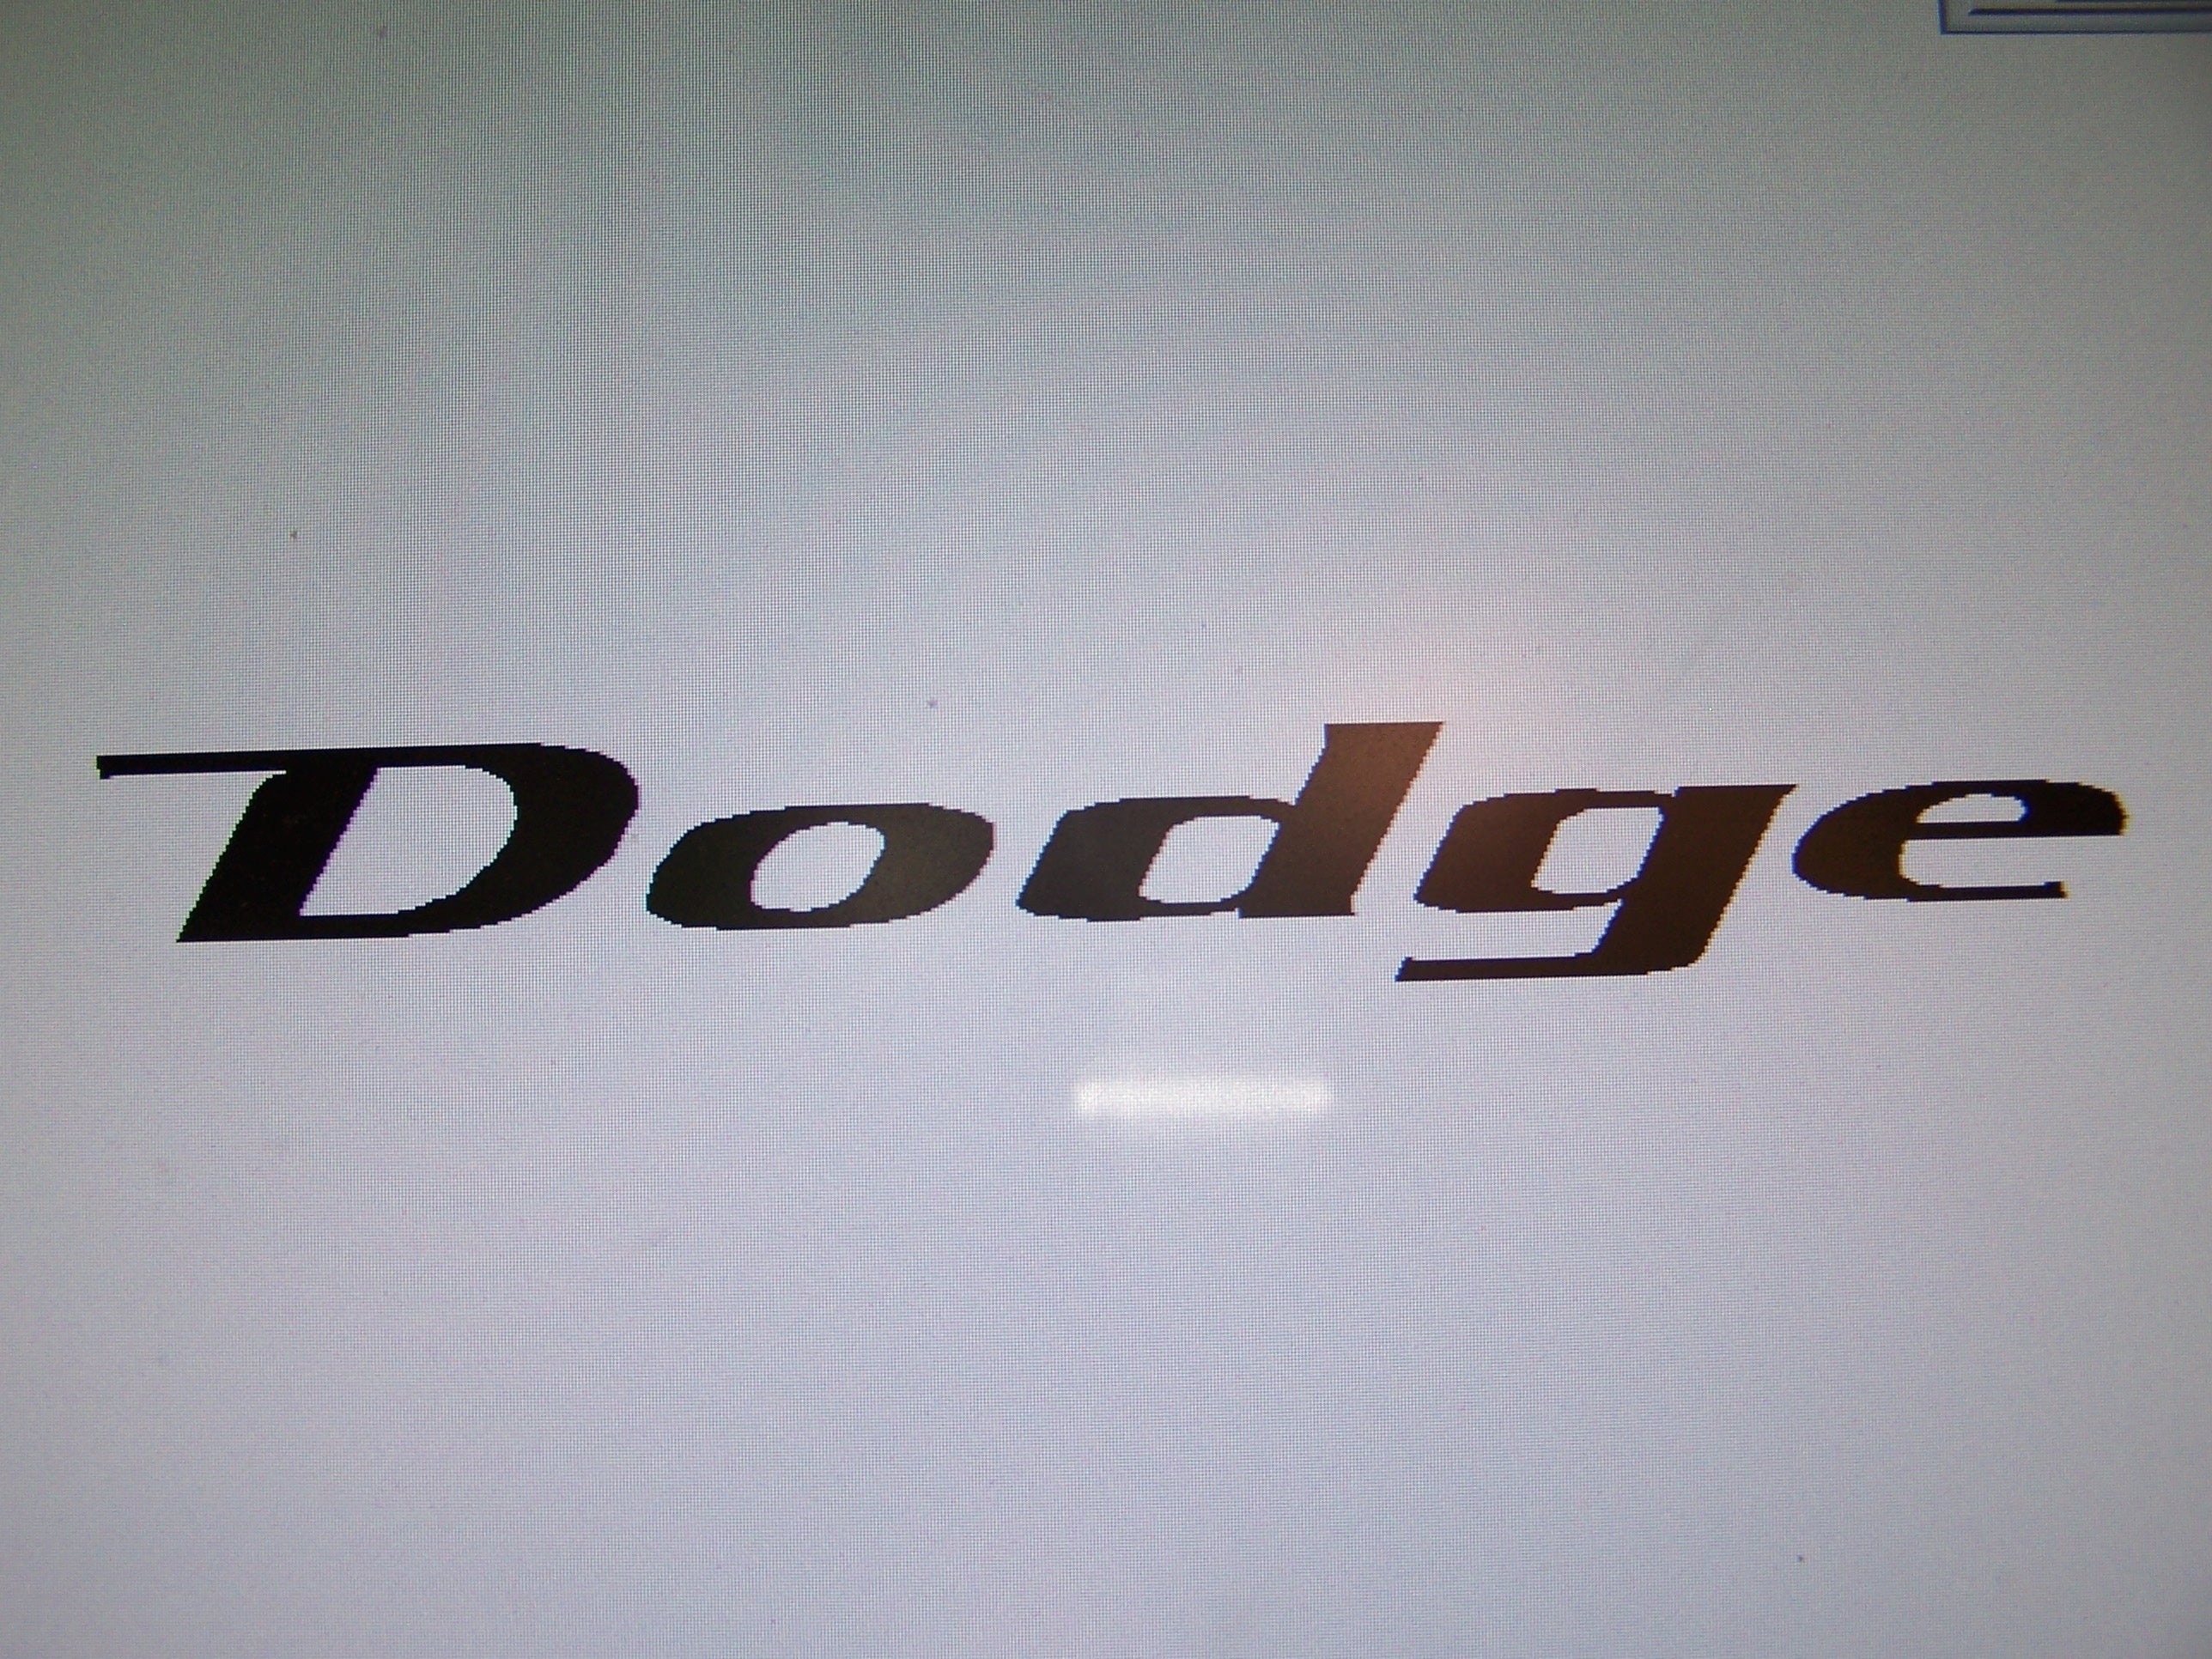 Dodge WINDSHIELD DECAL BANNER STICKER CHOOSE COLOR AND SIZE